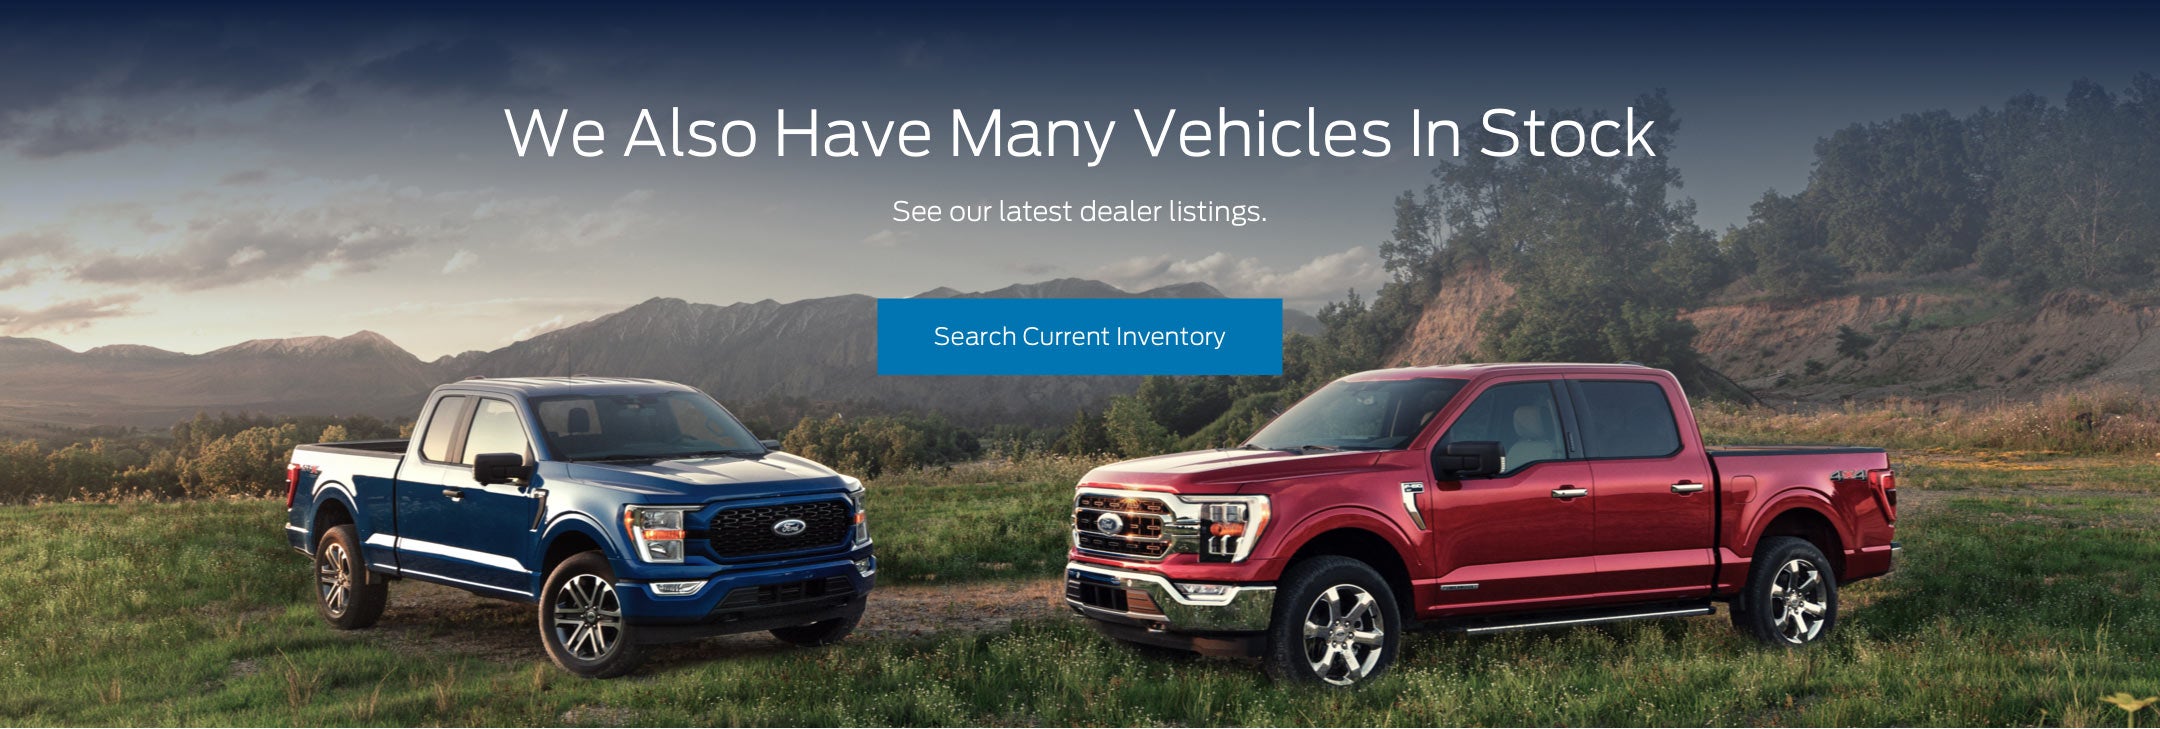 Ford vehicles in stock | Gary Yeomans Ford Knoxville in Knoxville TN